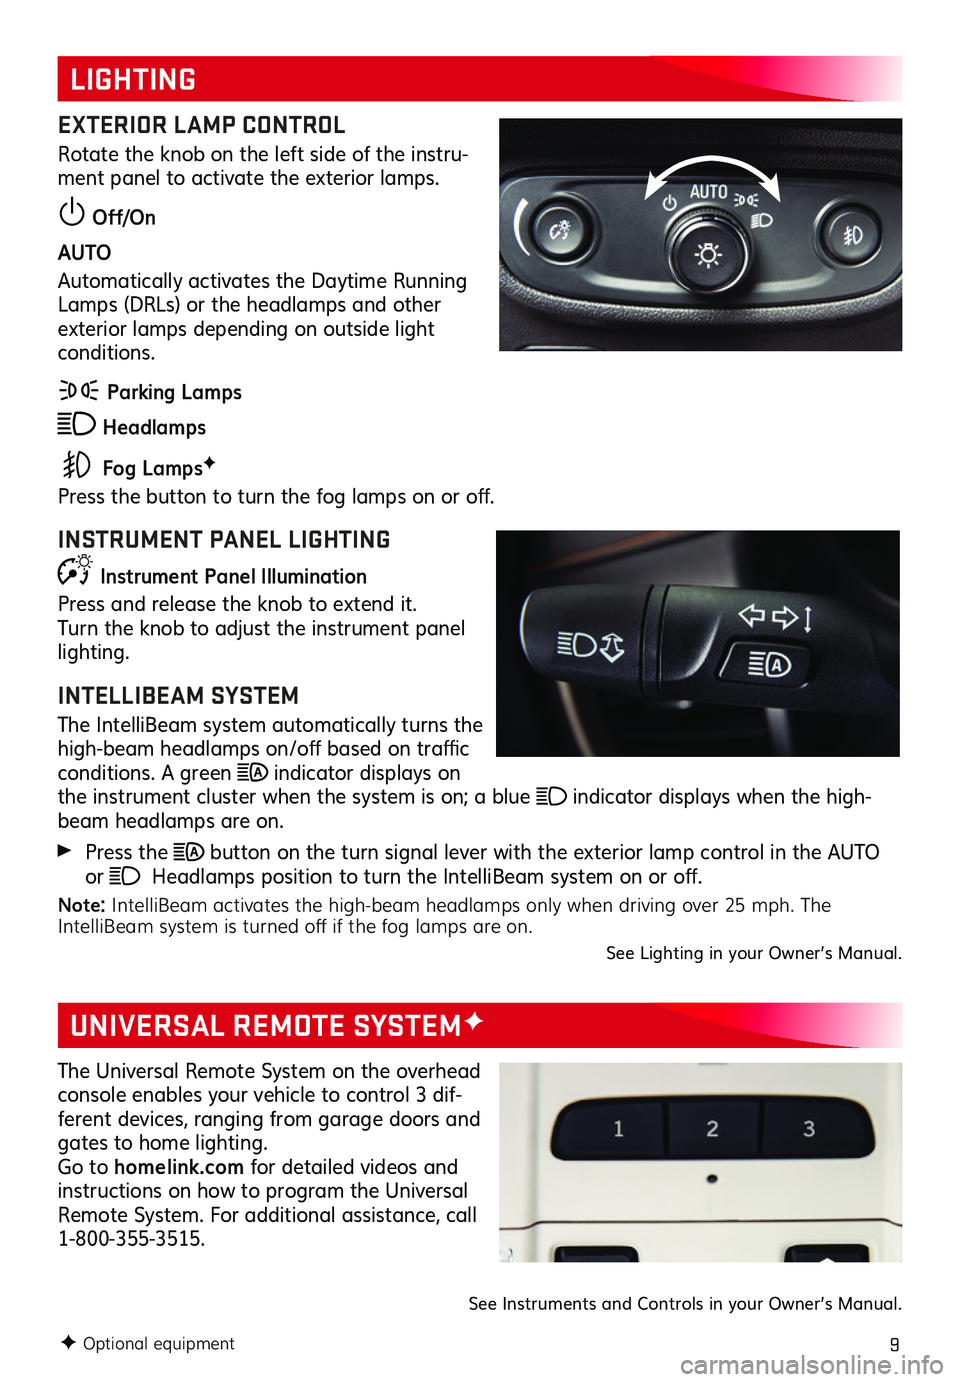 GMC TERRAIN 2020  Get To Know Guide 9
LIGHTING
UNIVERSAL REMOTE SYSTEMF
EXTERIOR LAMP CONTROL
Rotate the knob on the left side of the instru-ment panel to activate the exterior lamps.
 Off/On
AUTO 
Automatically activates the Daytime Ru